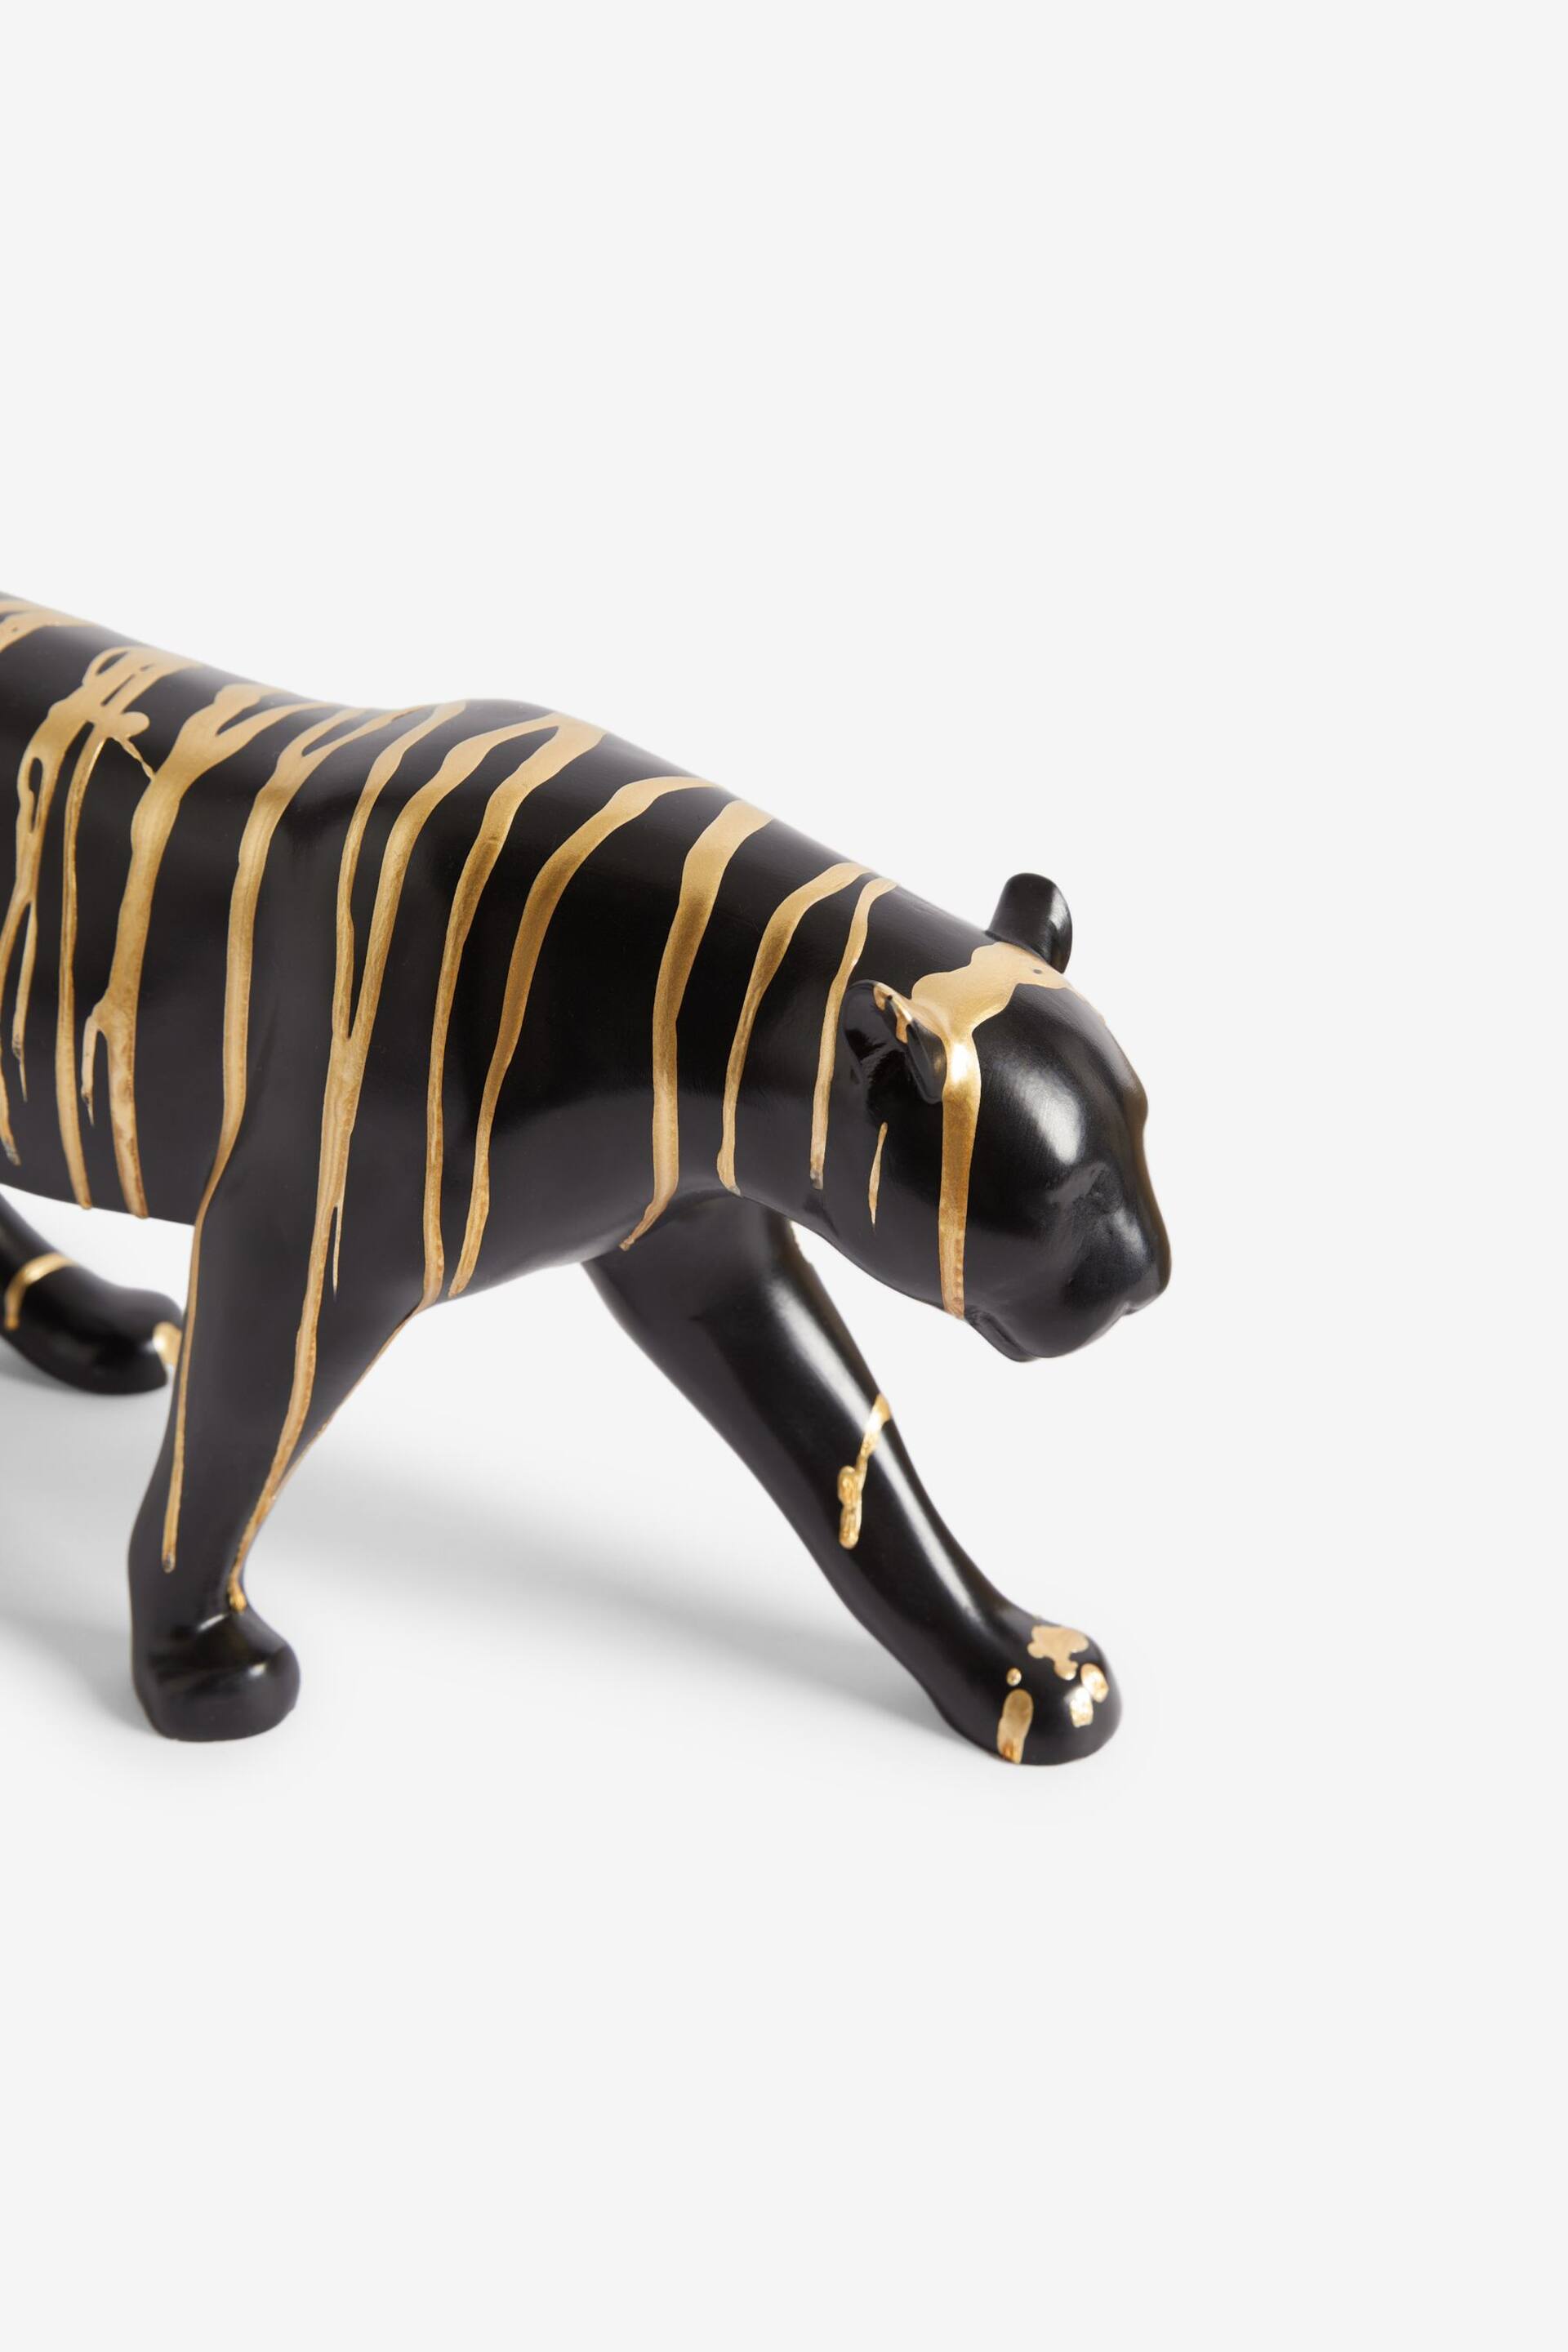 Black Petra the Panther Gold Drip Ornament - Image 4 of 4